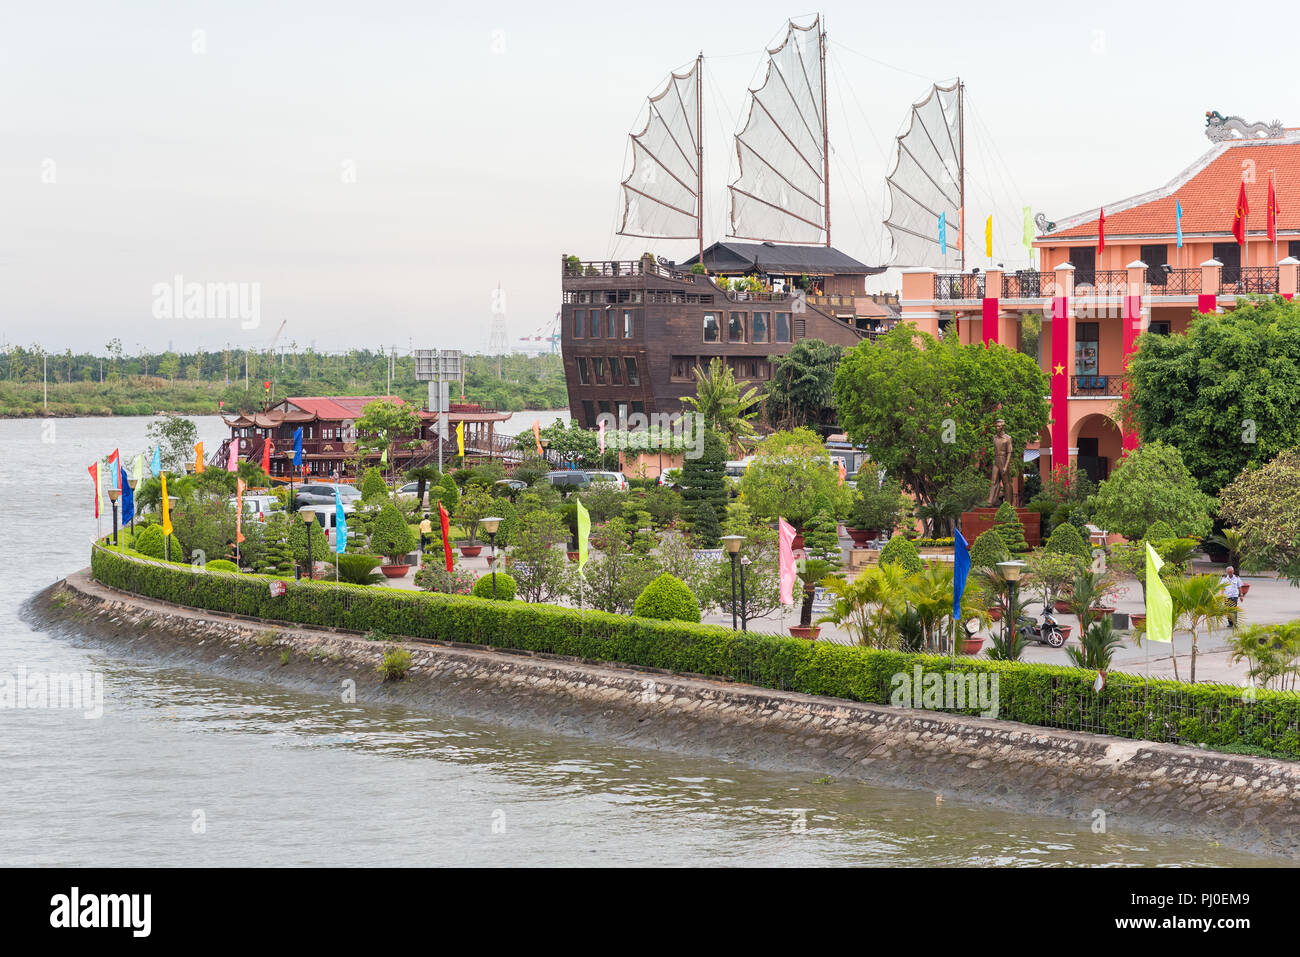 Ho Chi Minh City, Vietnam - April 27, 2018: a harbor on the Saigon River, Elisa Floating Restaurant (in the shape of a ship) and Ho Chi Minh Museum. Stock Photo